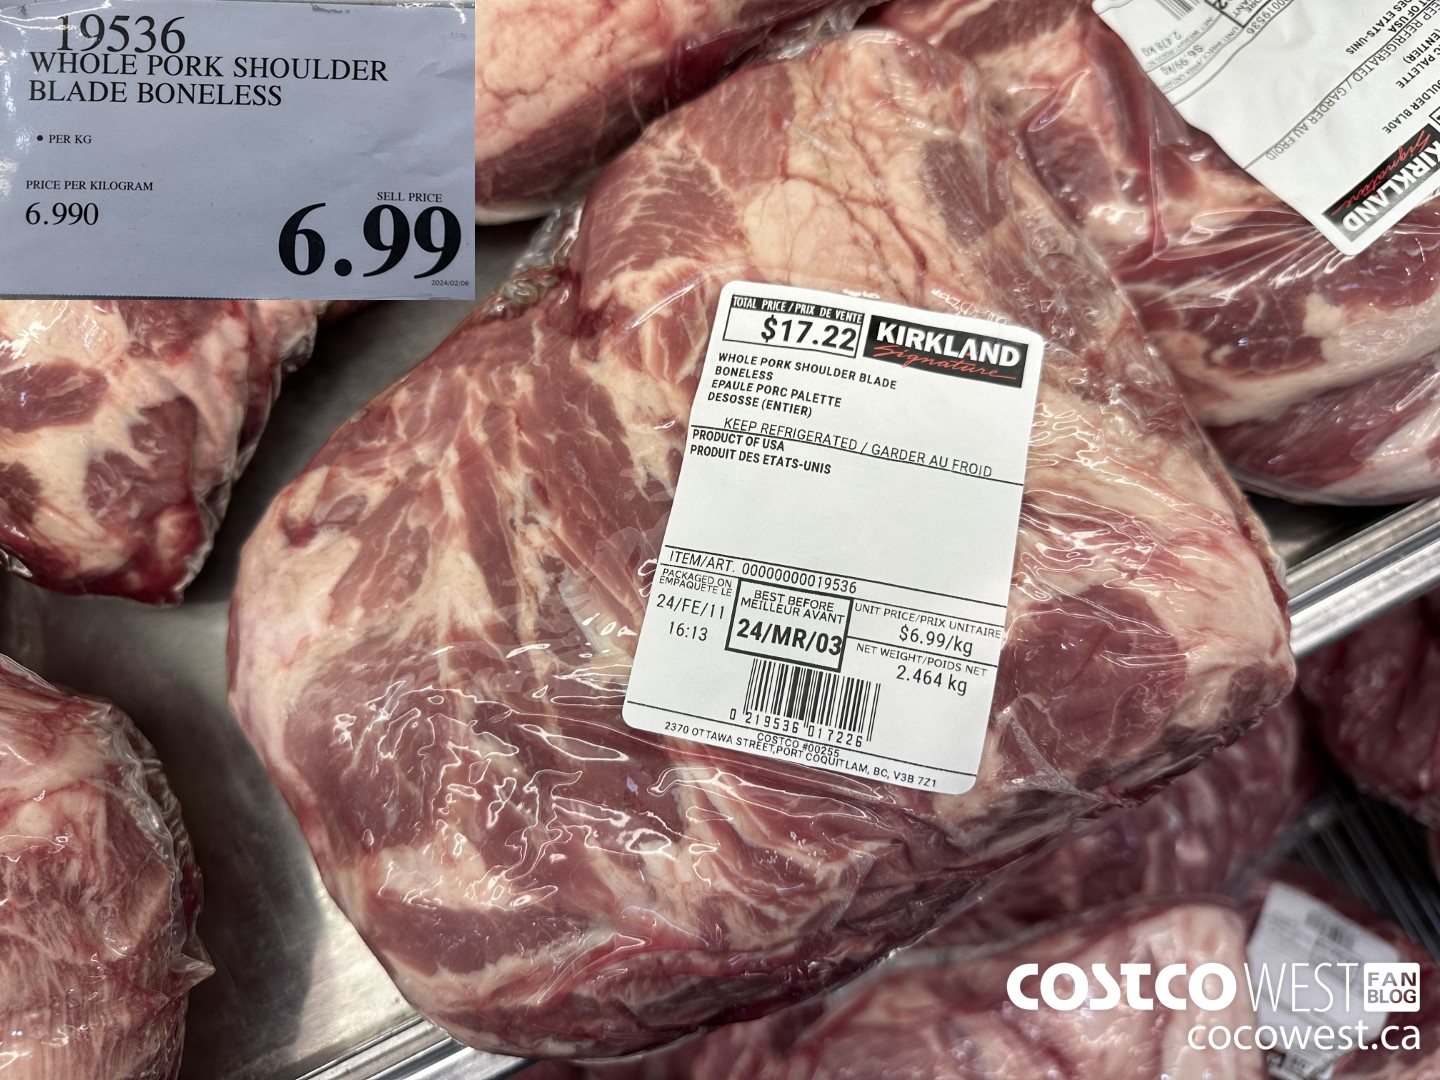 Canada Ungraded Ribeye - Beef & Veal - Meat & Seafood  FREE Delivery, NO  minimum for Groceries Purchased at COSTCO BUSINESS CENTRE.